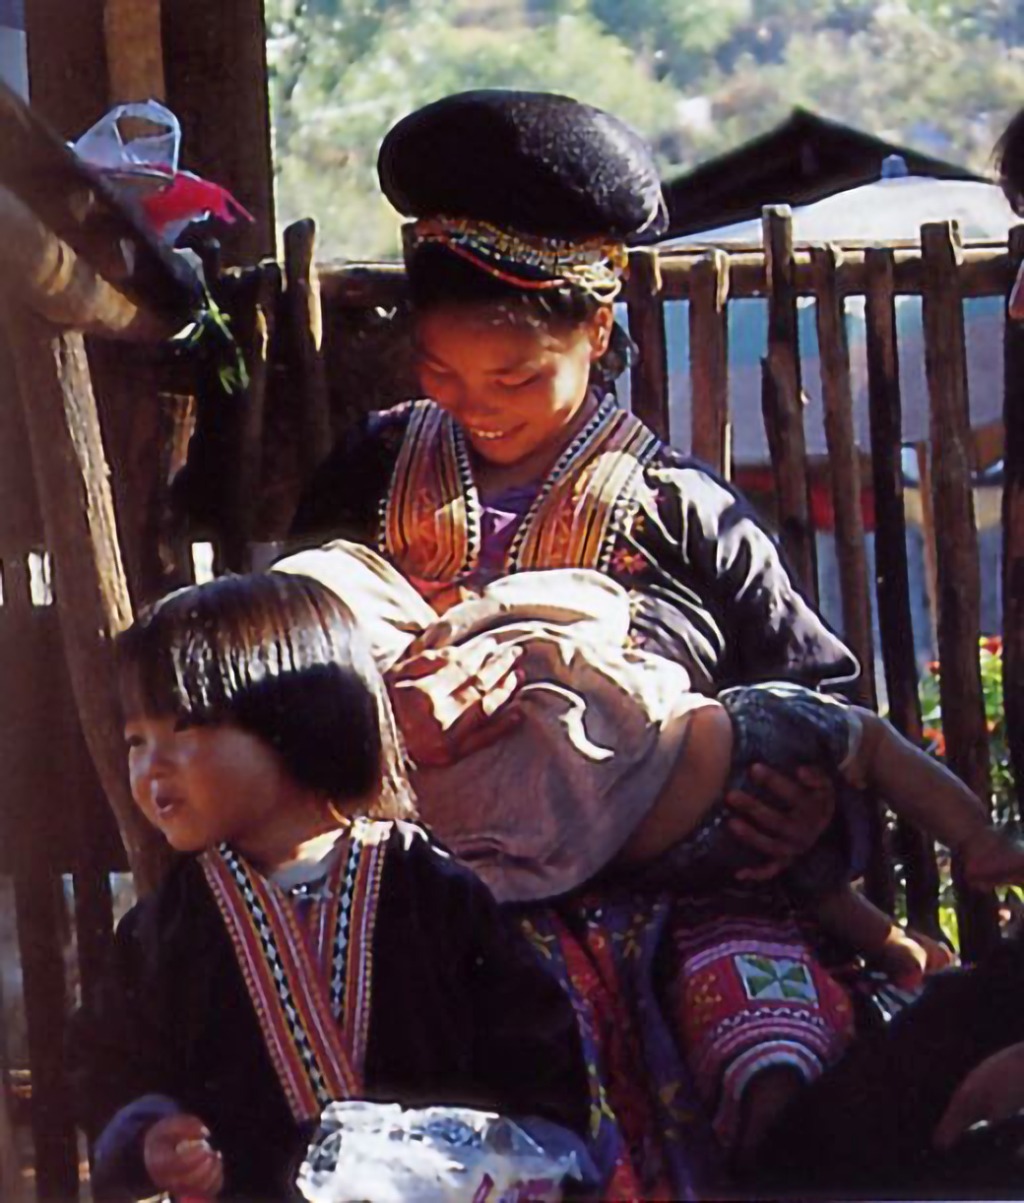 Hmong Family in Traditional Dress